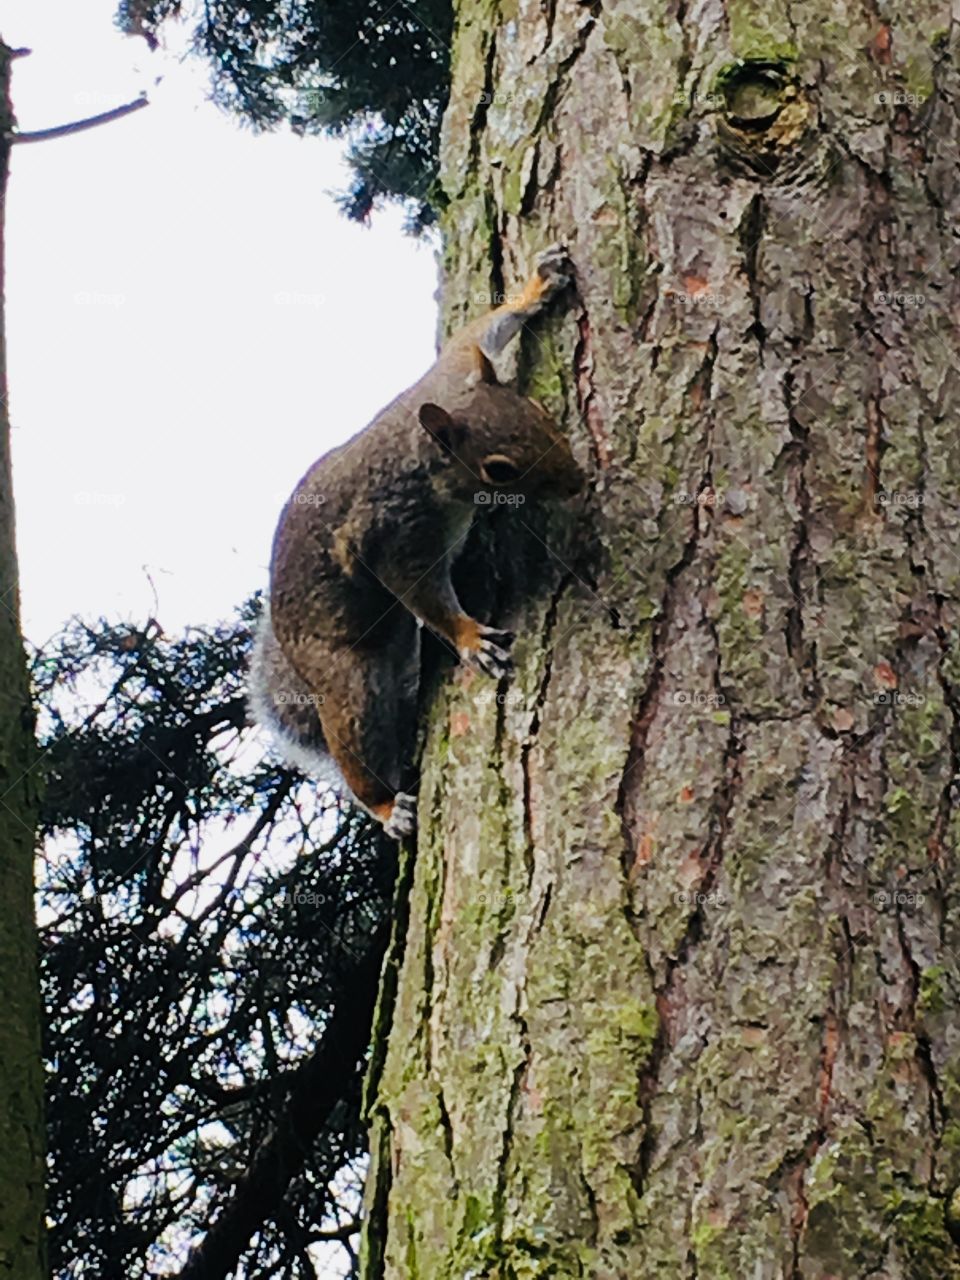 Close up of squirrel climbing on pine tree trunk bark in my garden in England 